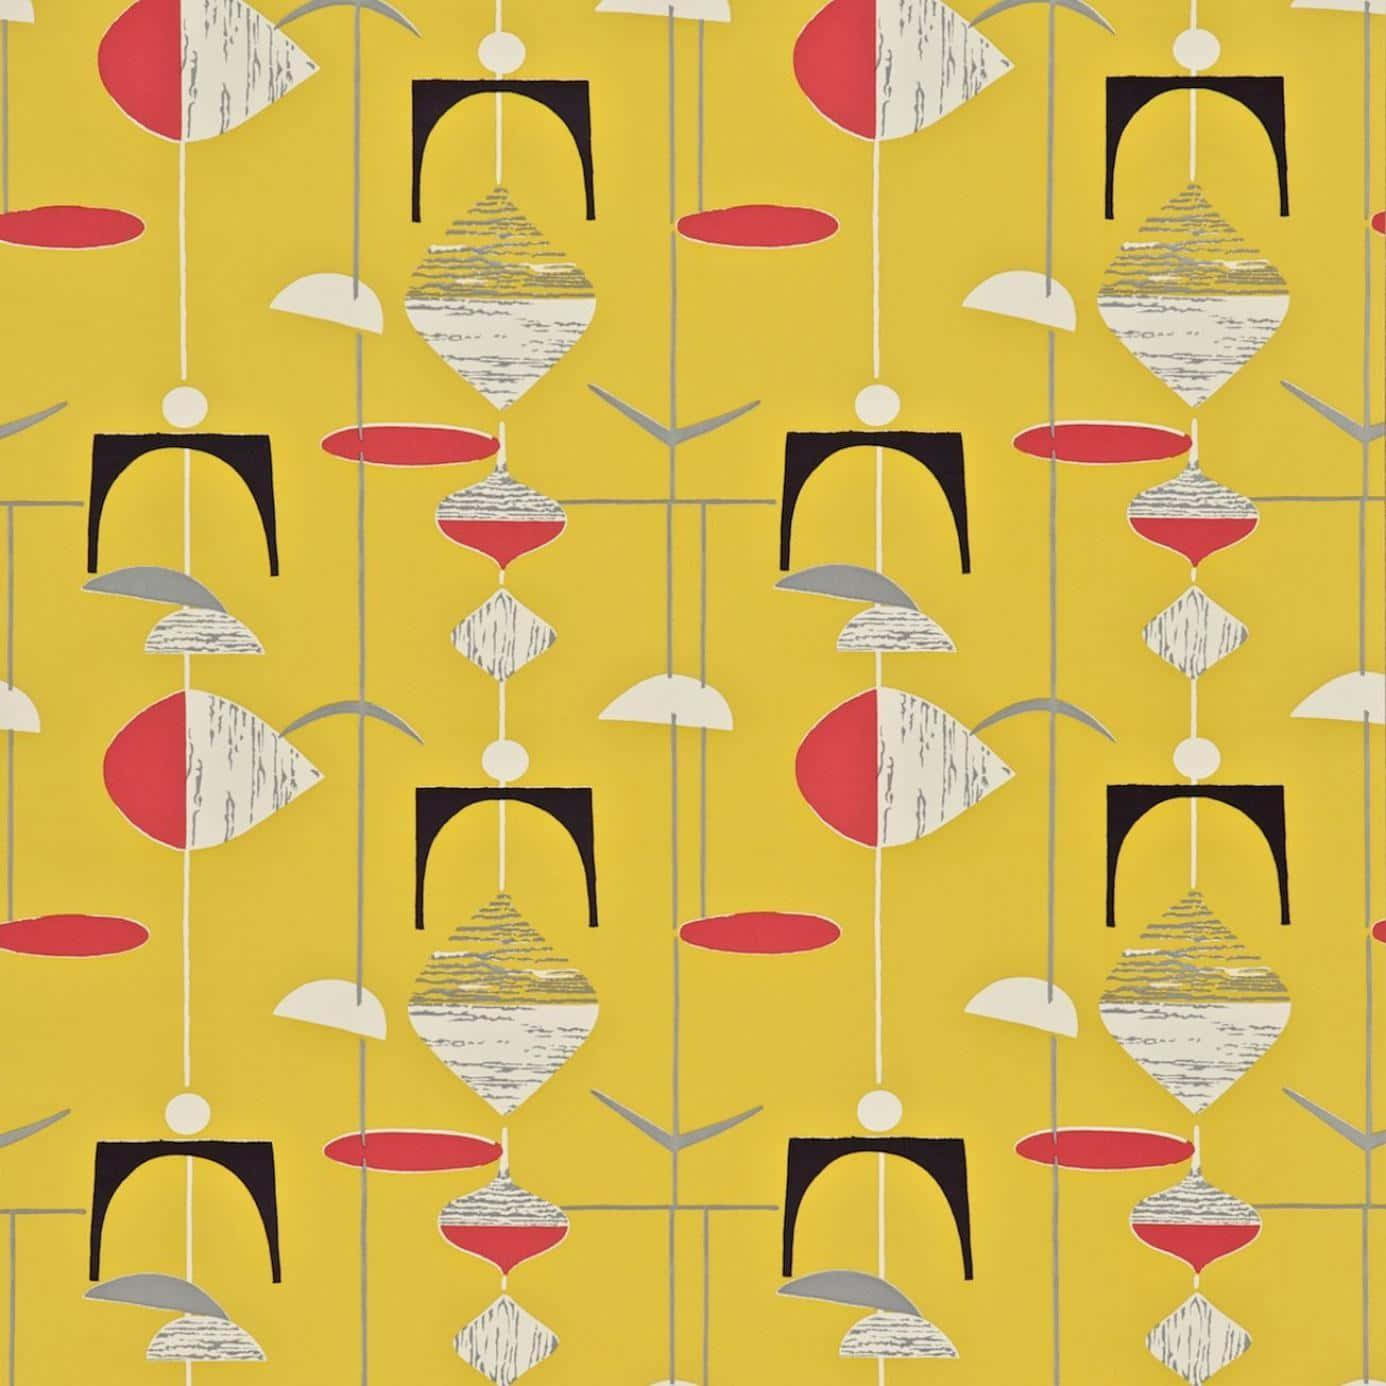 A Blast From The Past: Iconic 1950s Style Wallpaper